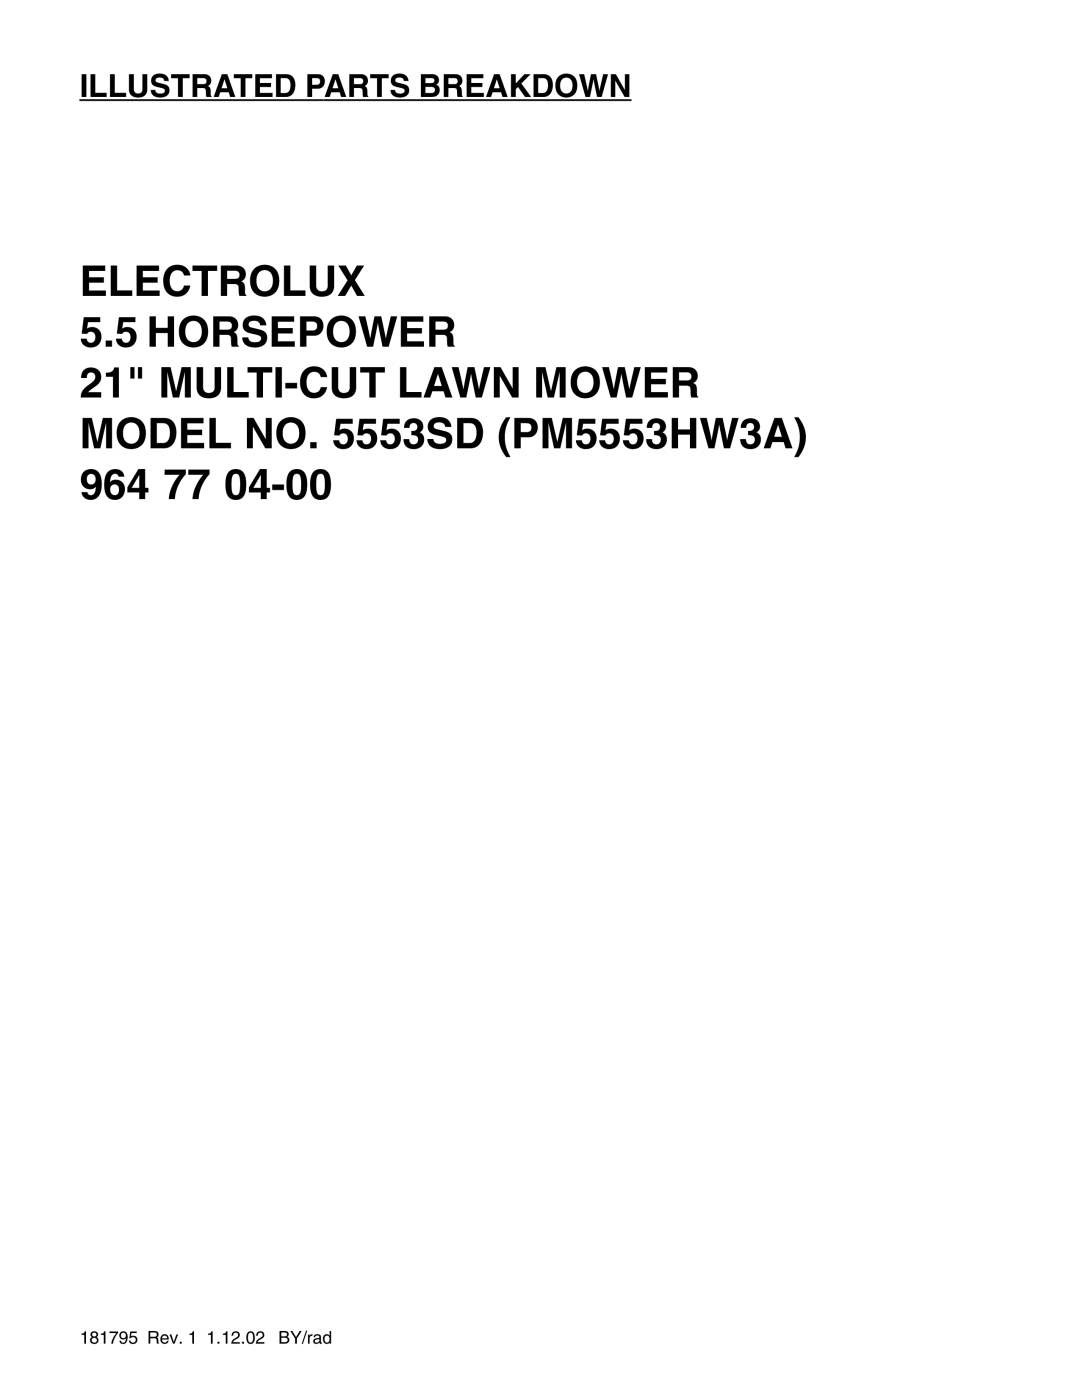 Electrolux 5553SD (PM5553HW3A) manual ELECTROLUX 5.5 HORSEPOWER, Illustrated Parts Breakdown 